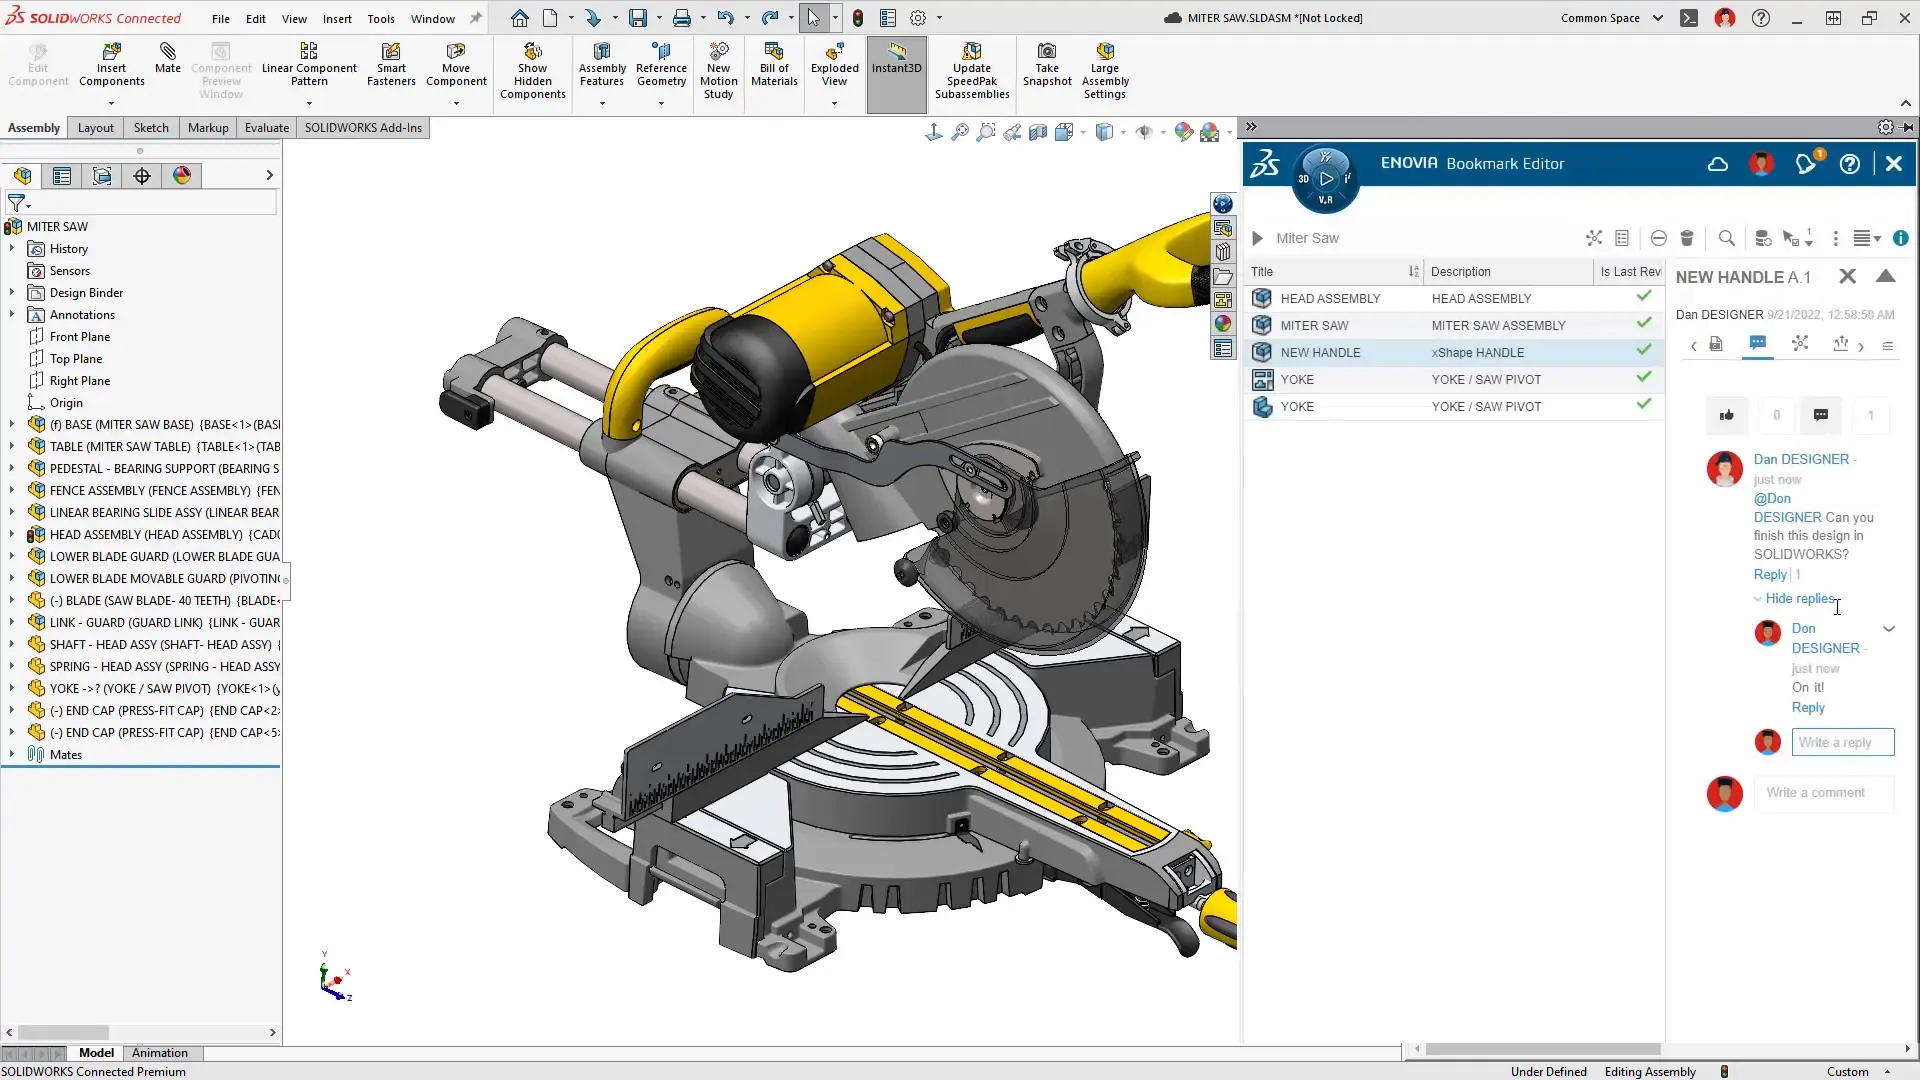 Comments and collaborative tools are visible within SOLIDWORKS task pane, overlaying a model of a yellow and black mitre saw.